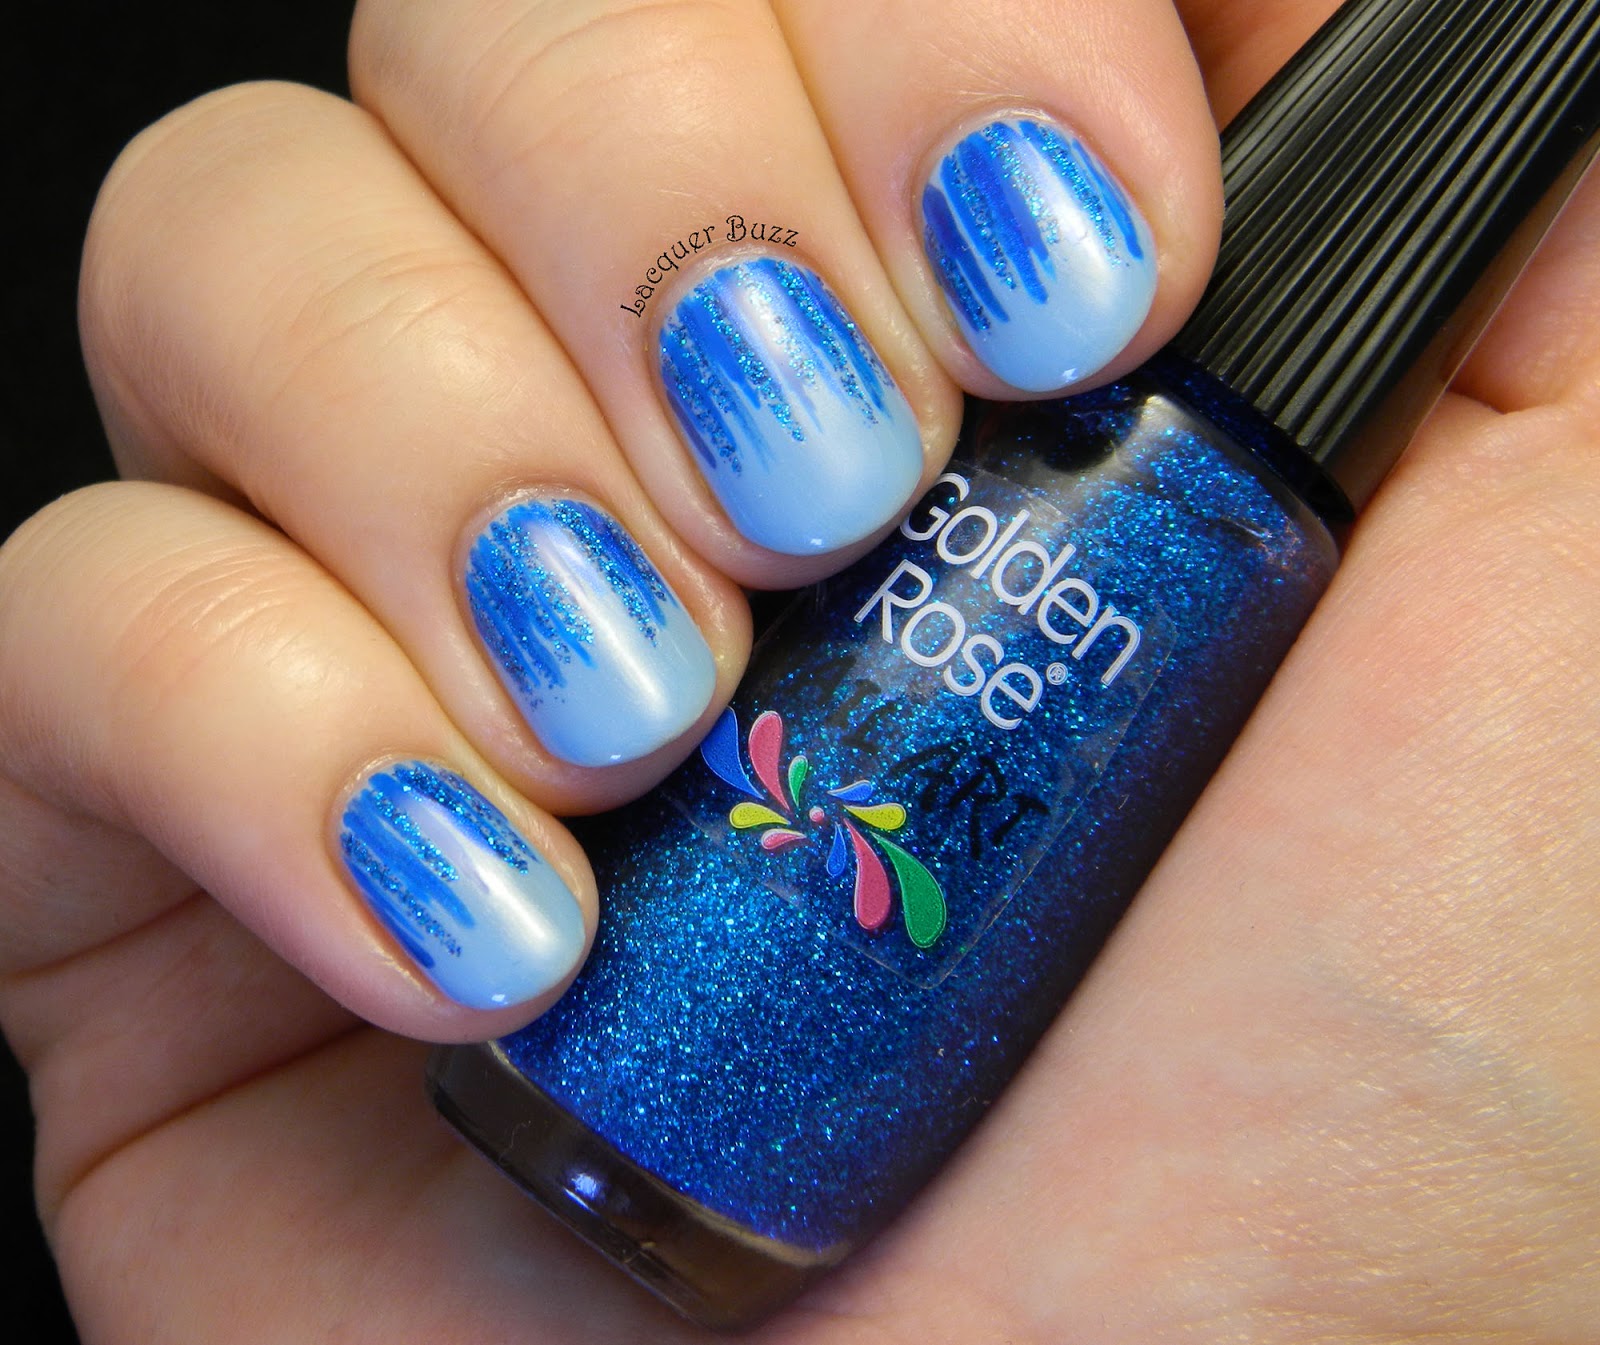 Lacquer Buzz: Monday Blues: Waterfall Nails